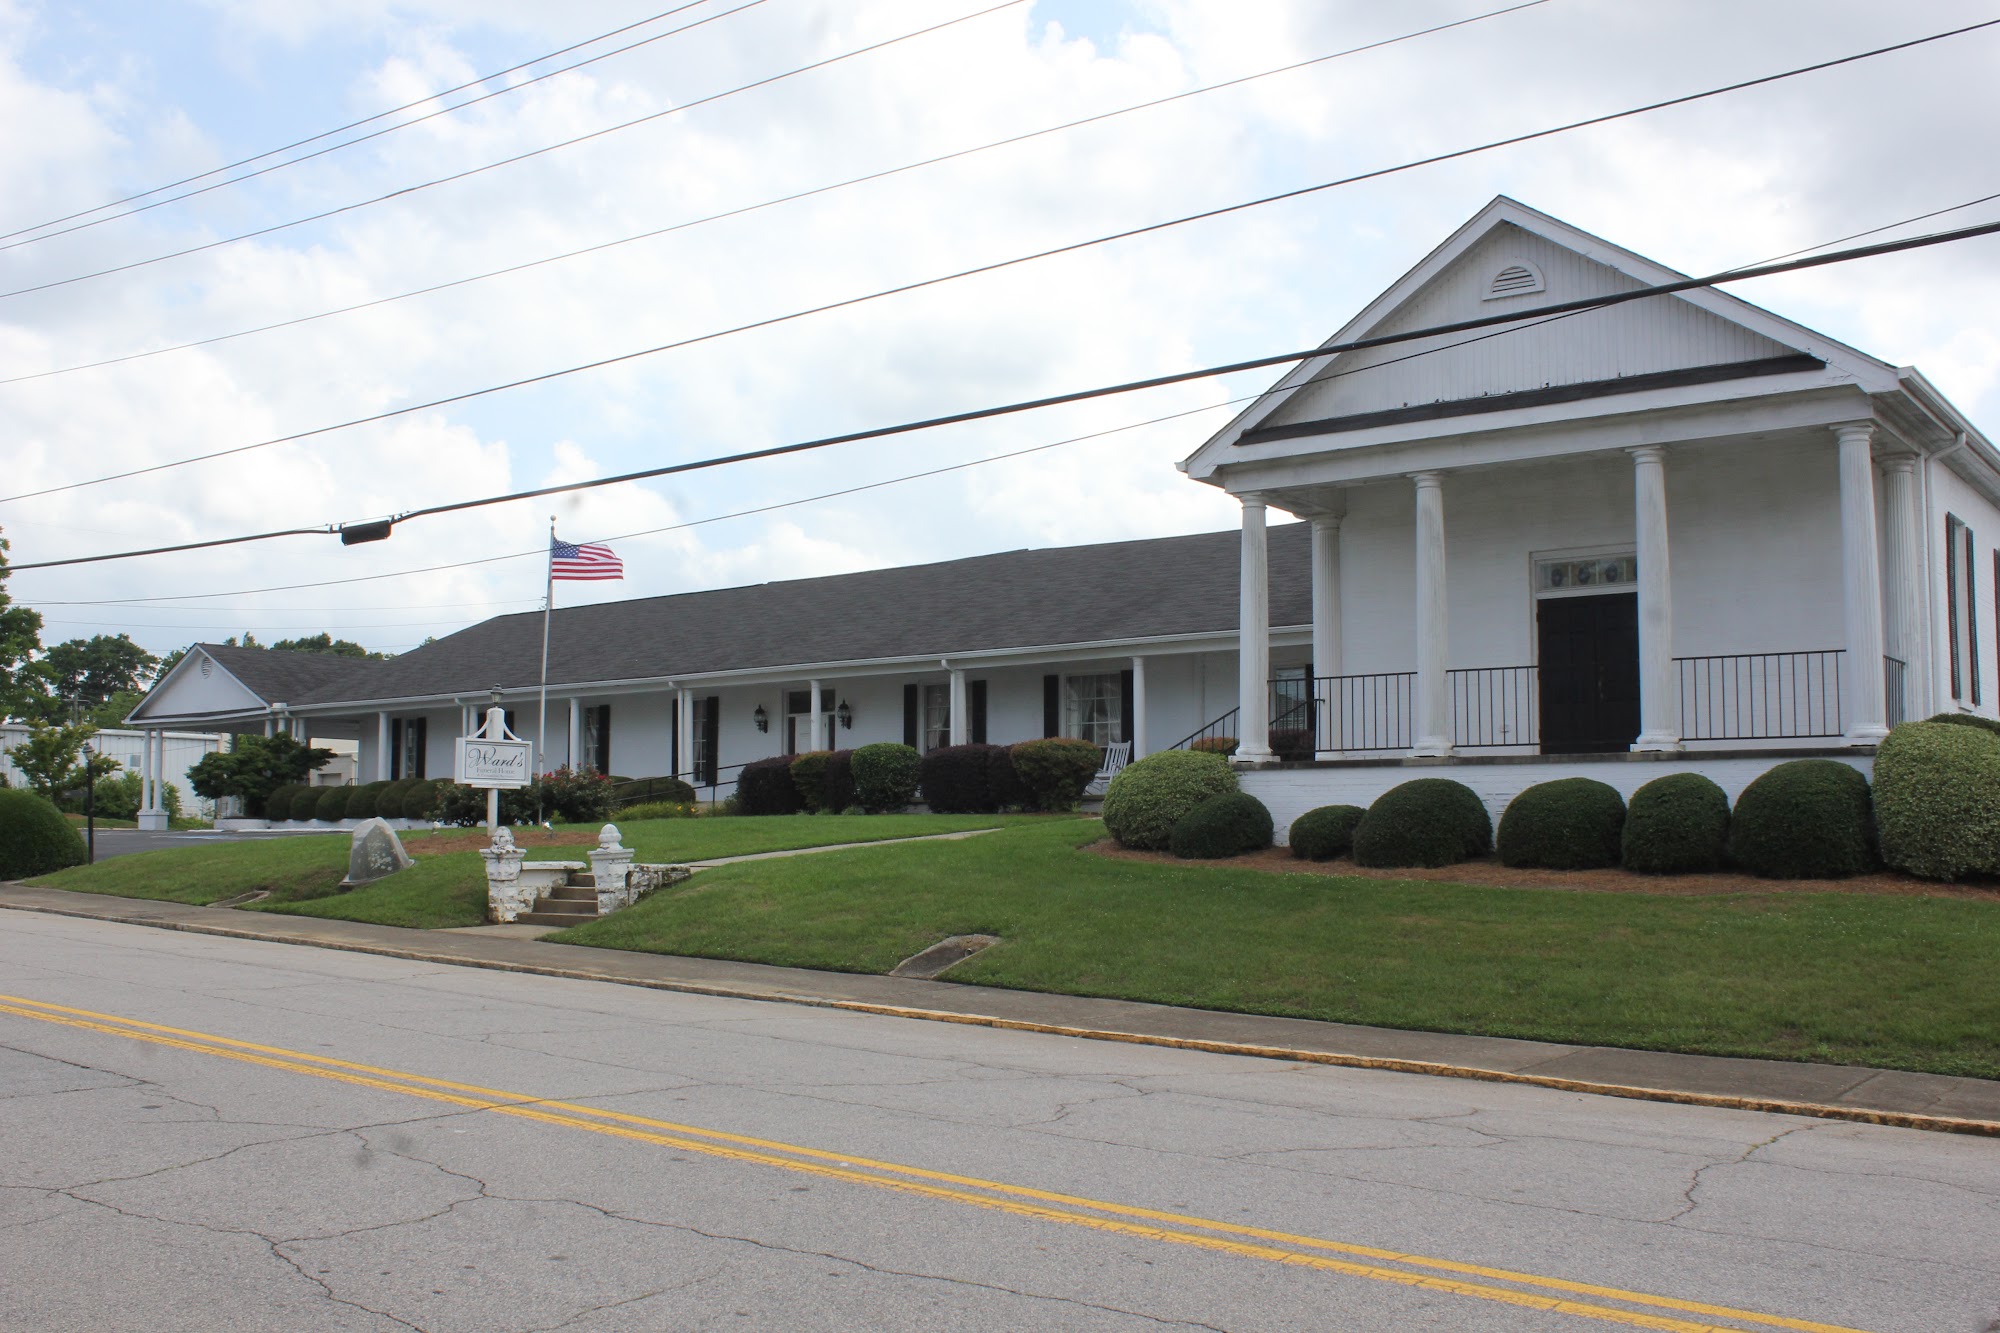 Ward's Funeral Home